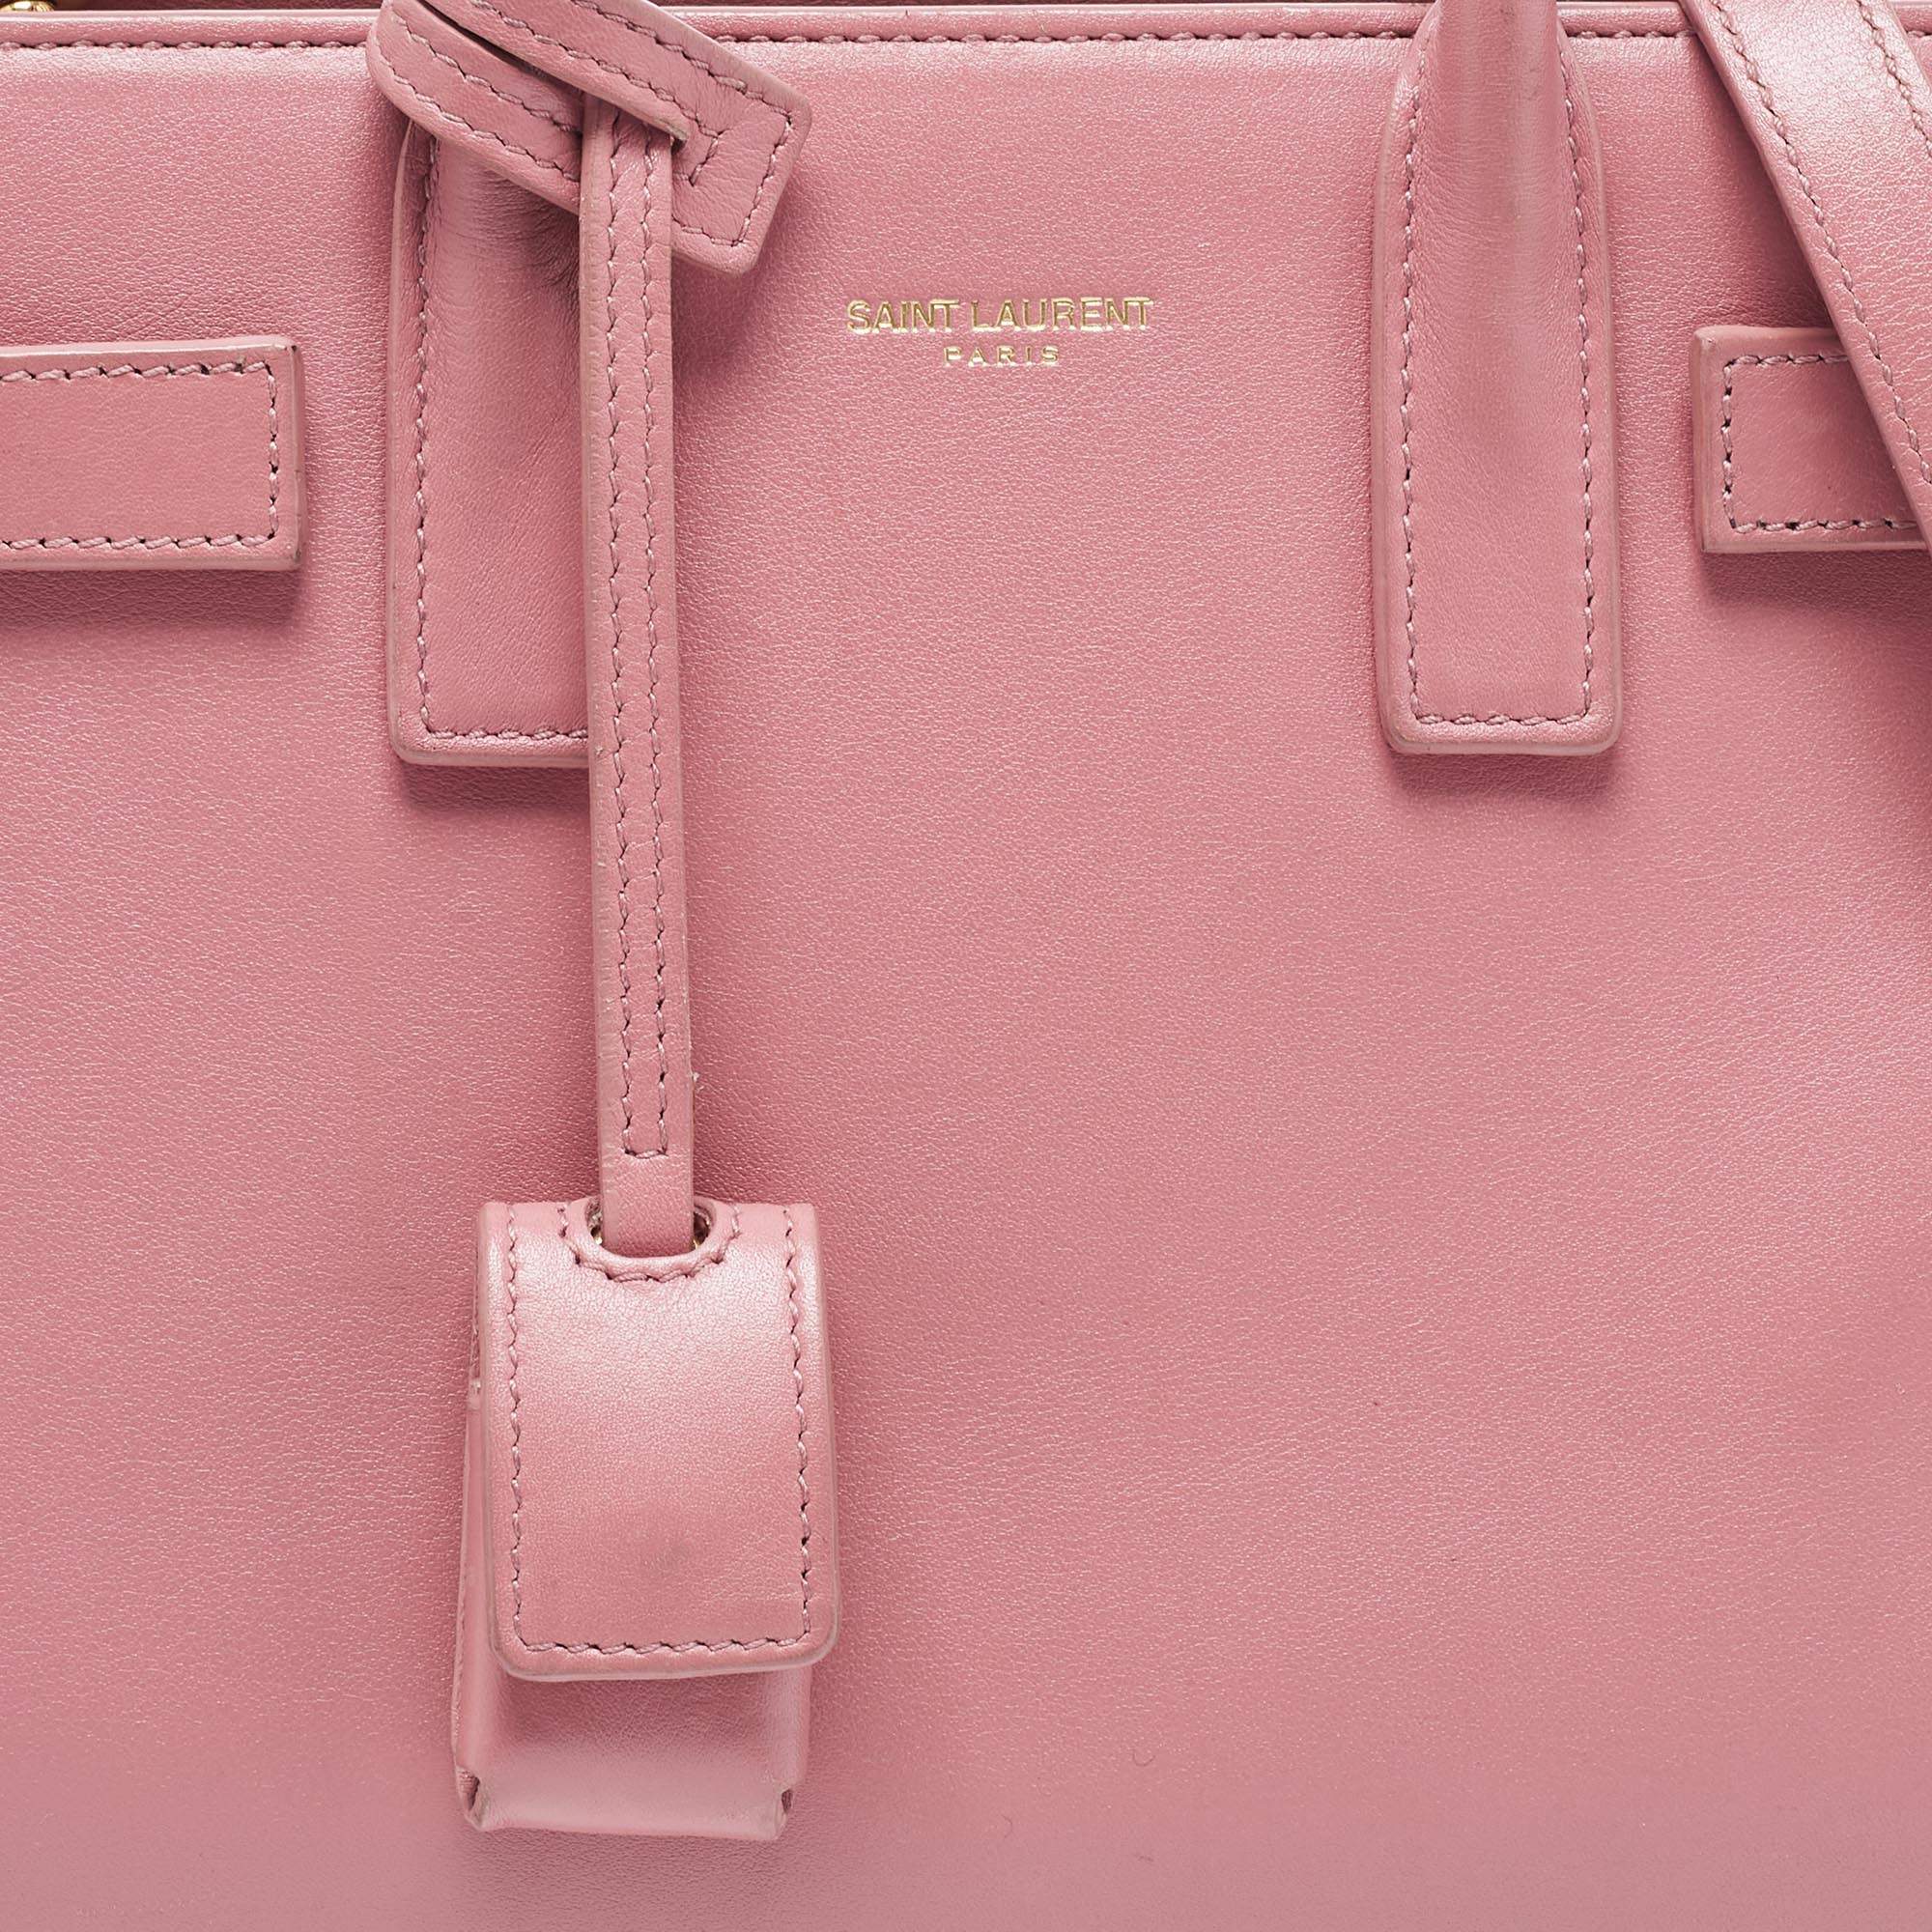 Sac de jour leather tote Saint Laurent Pink in Leather - 32818336